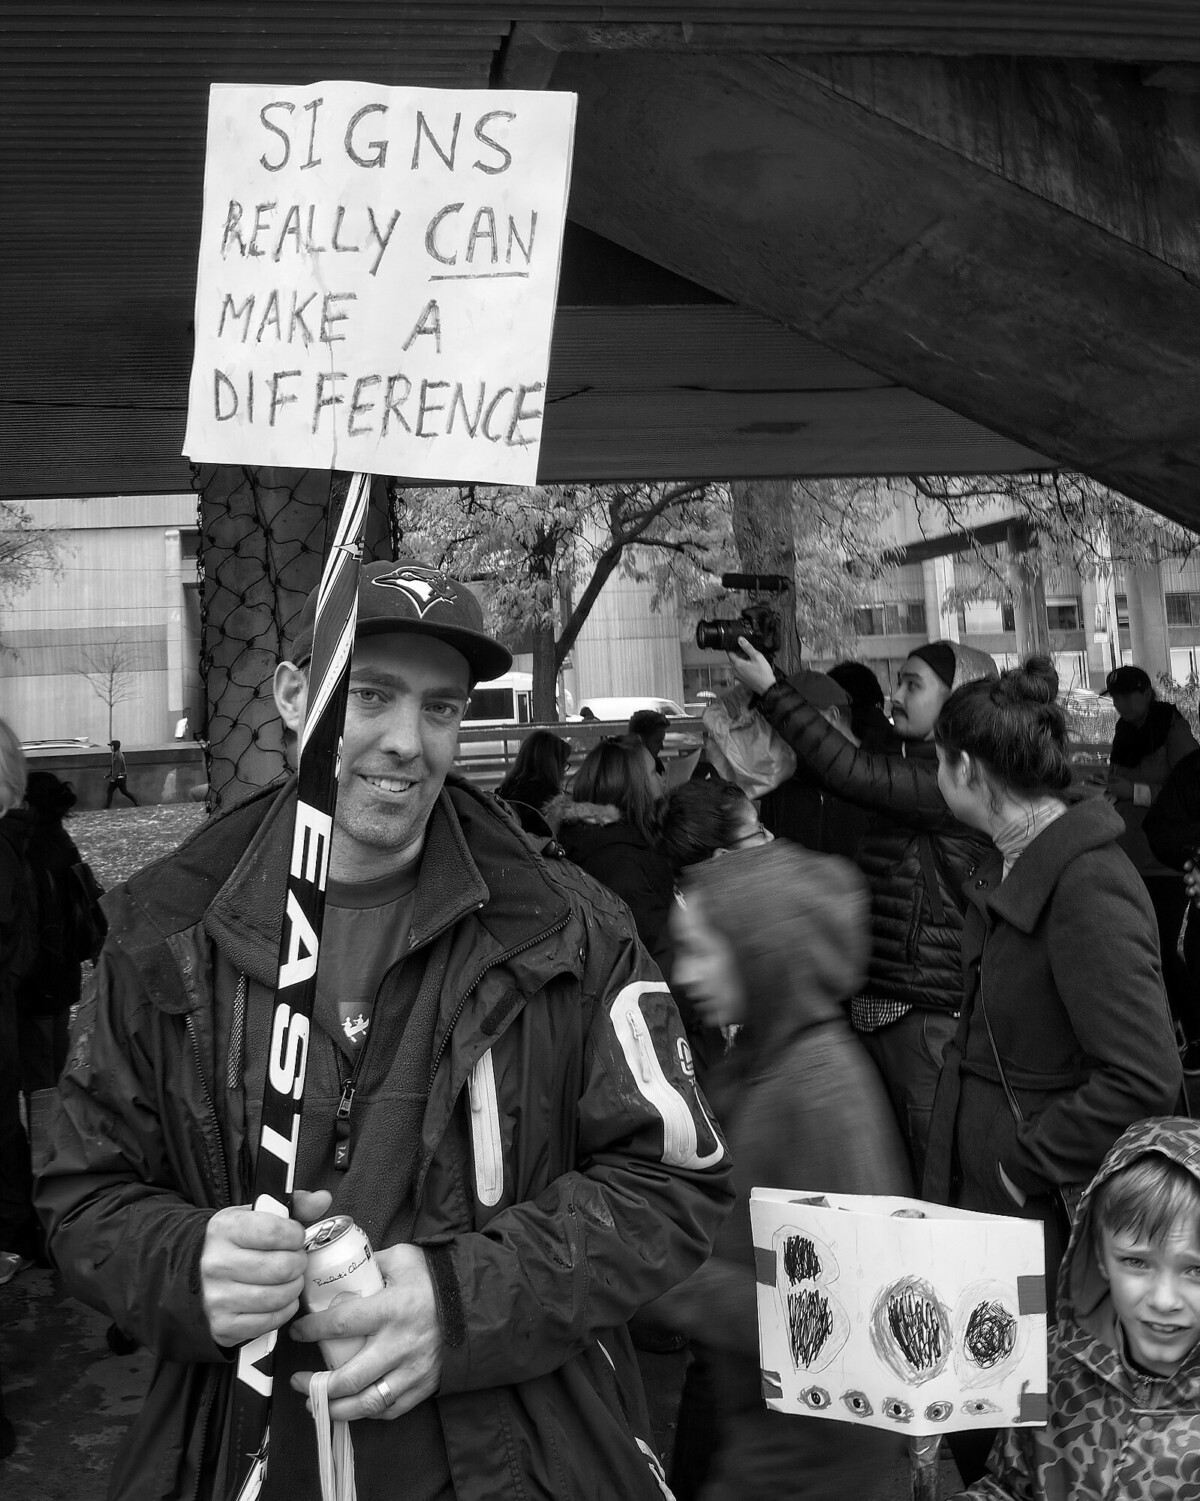 Ironic Guy at a Protest